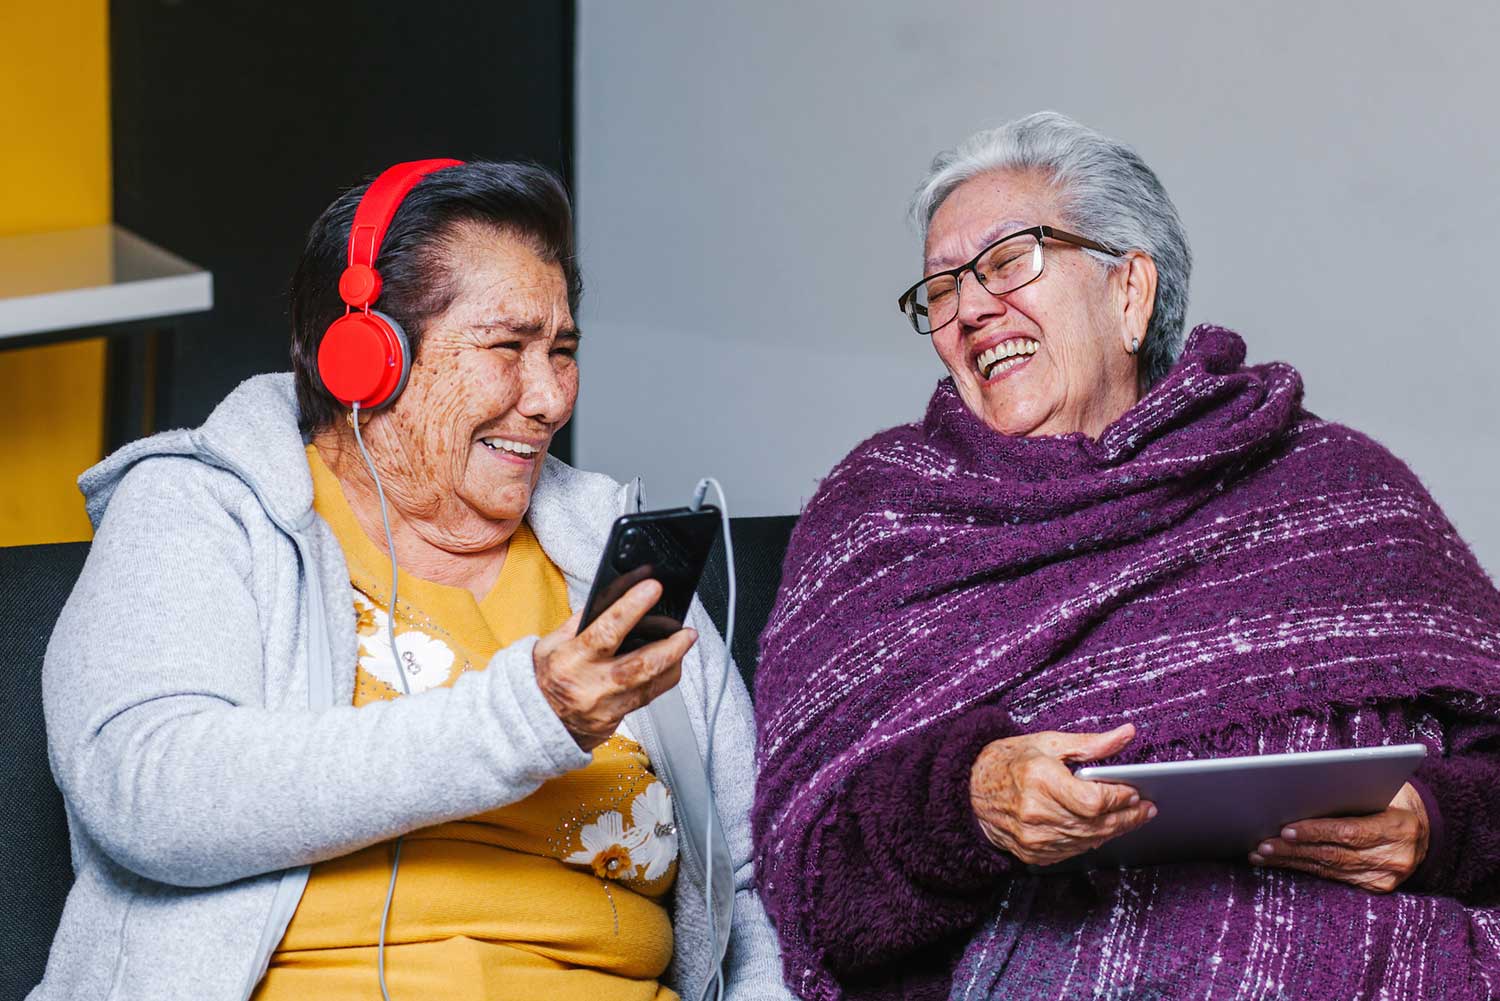 Two older adults laugh as one listens to a smartphone with headphones on and the other looks at a computer tablet.